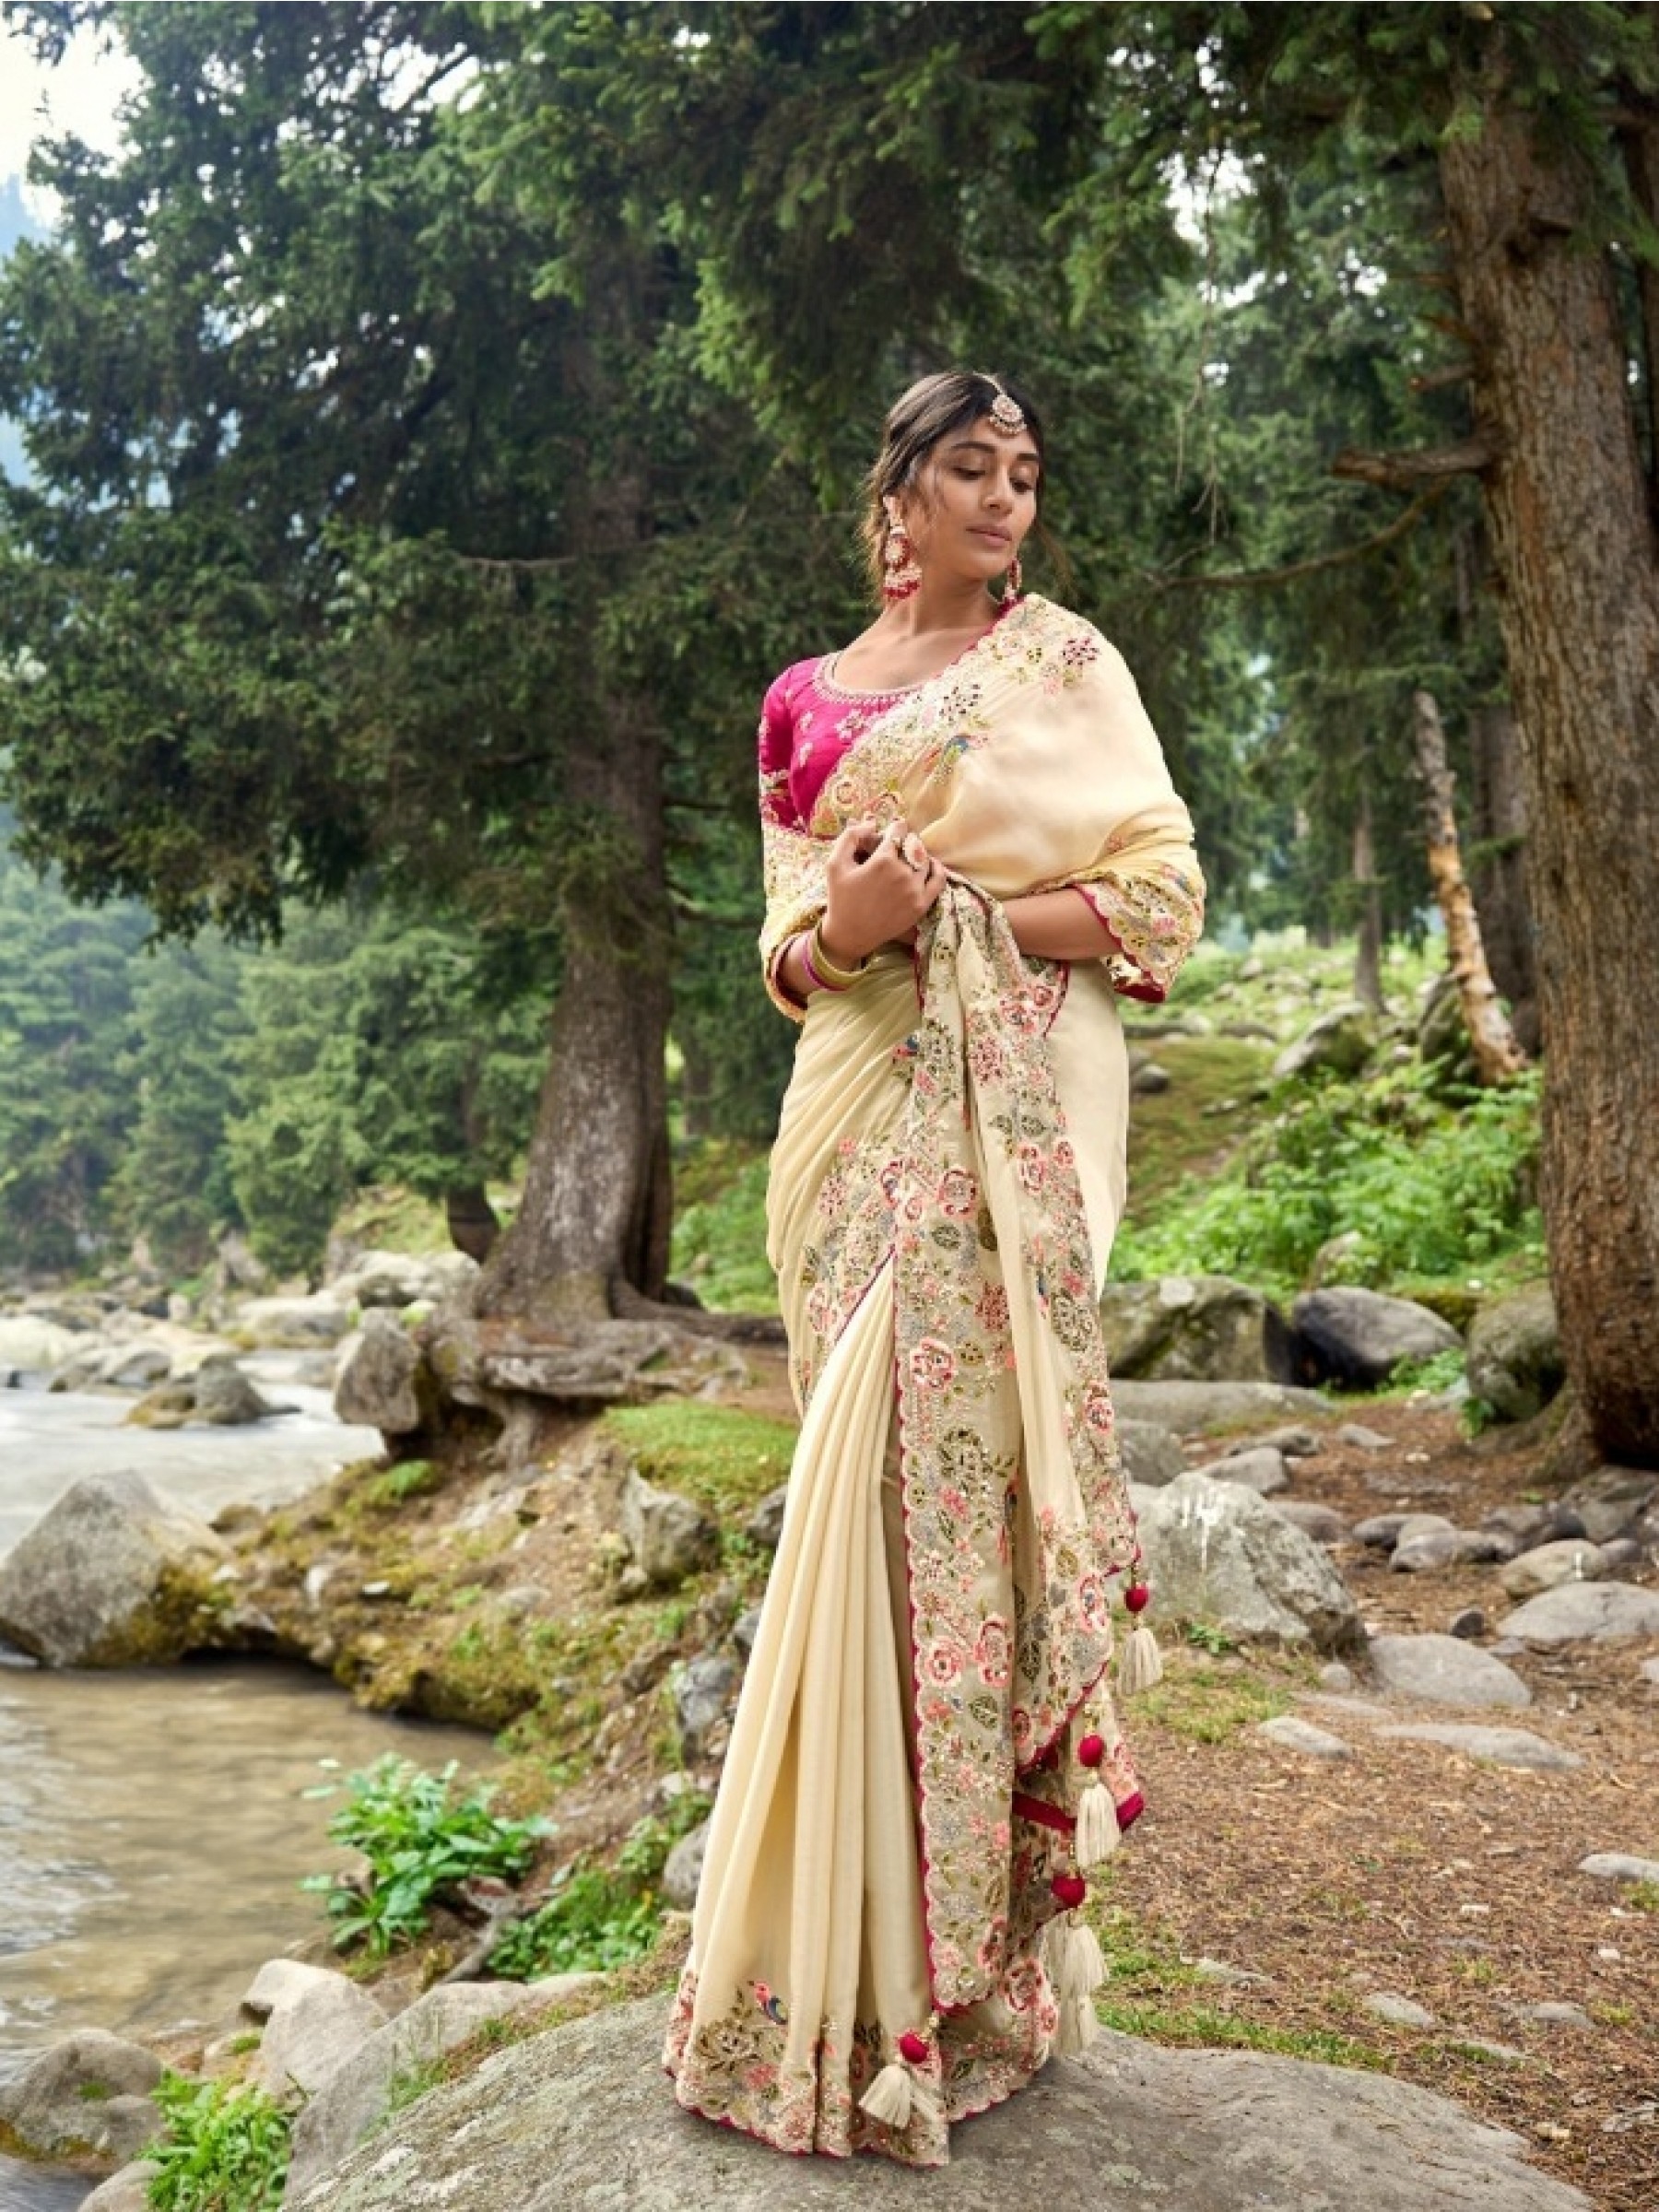 Pure Dola Silk Saree In Beige Color With Embroidery Work